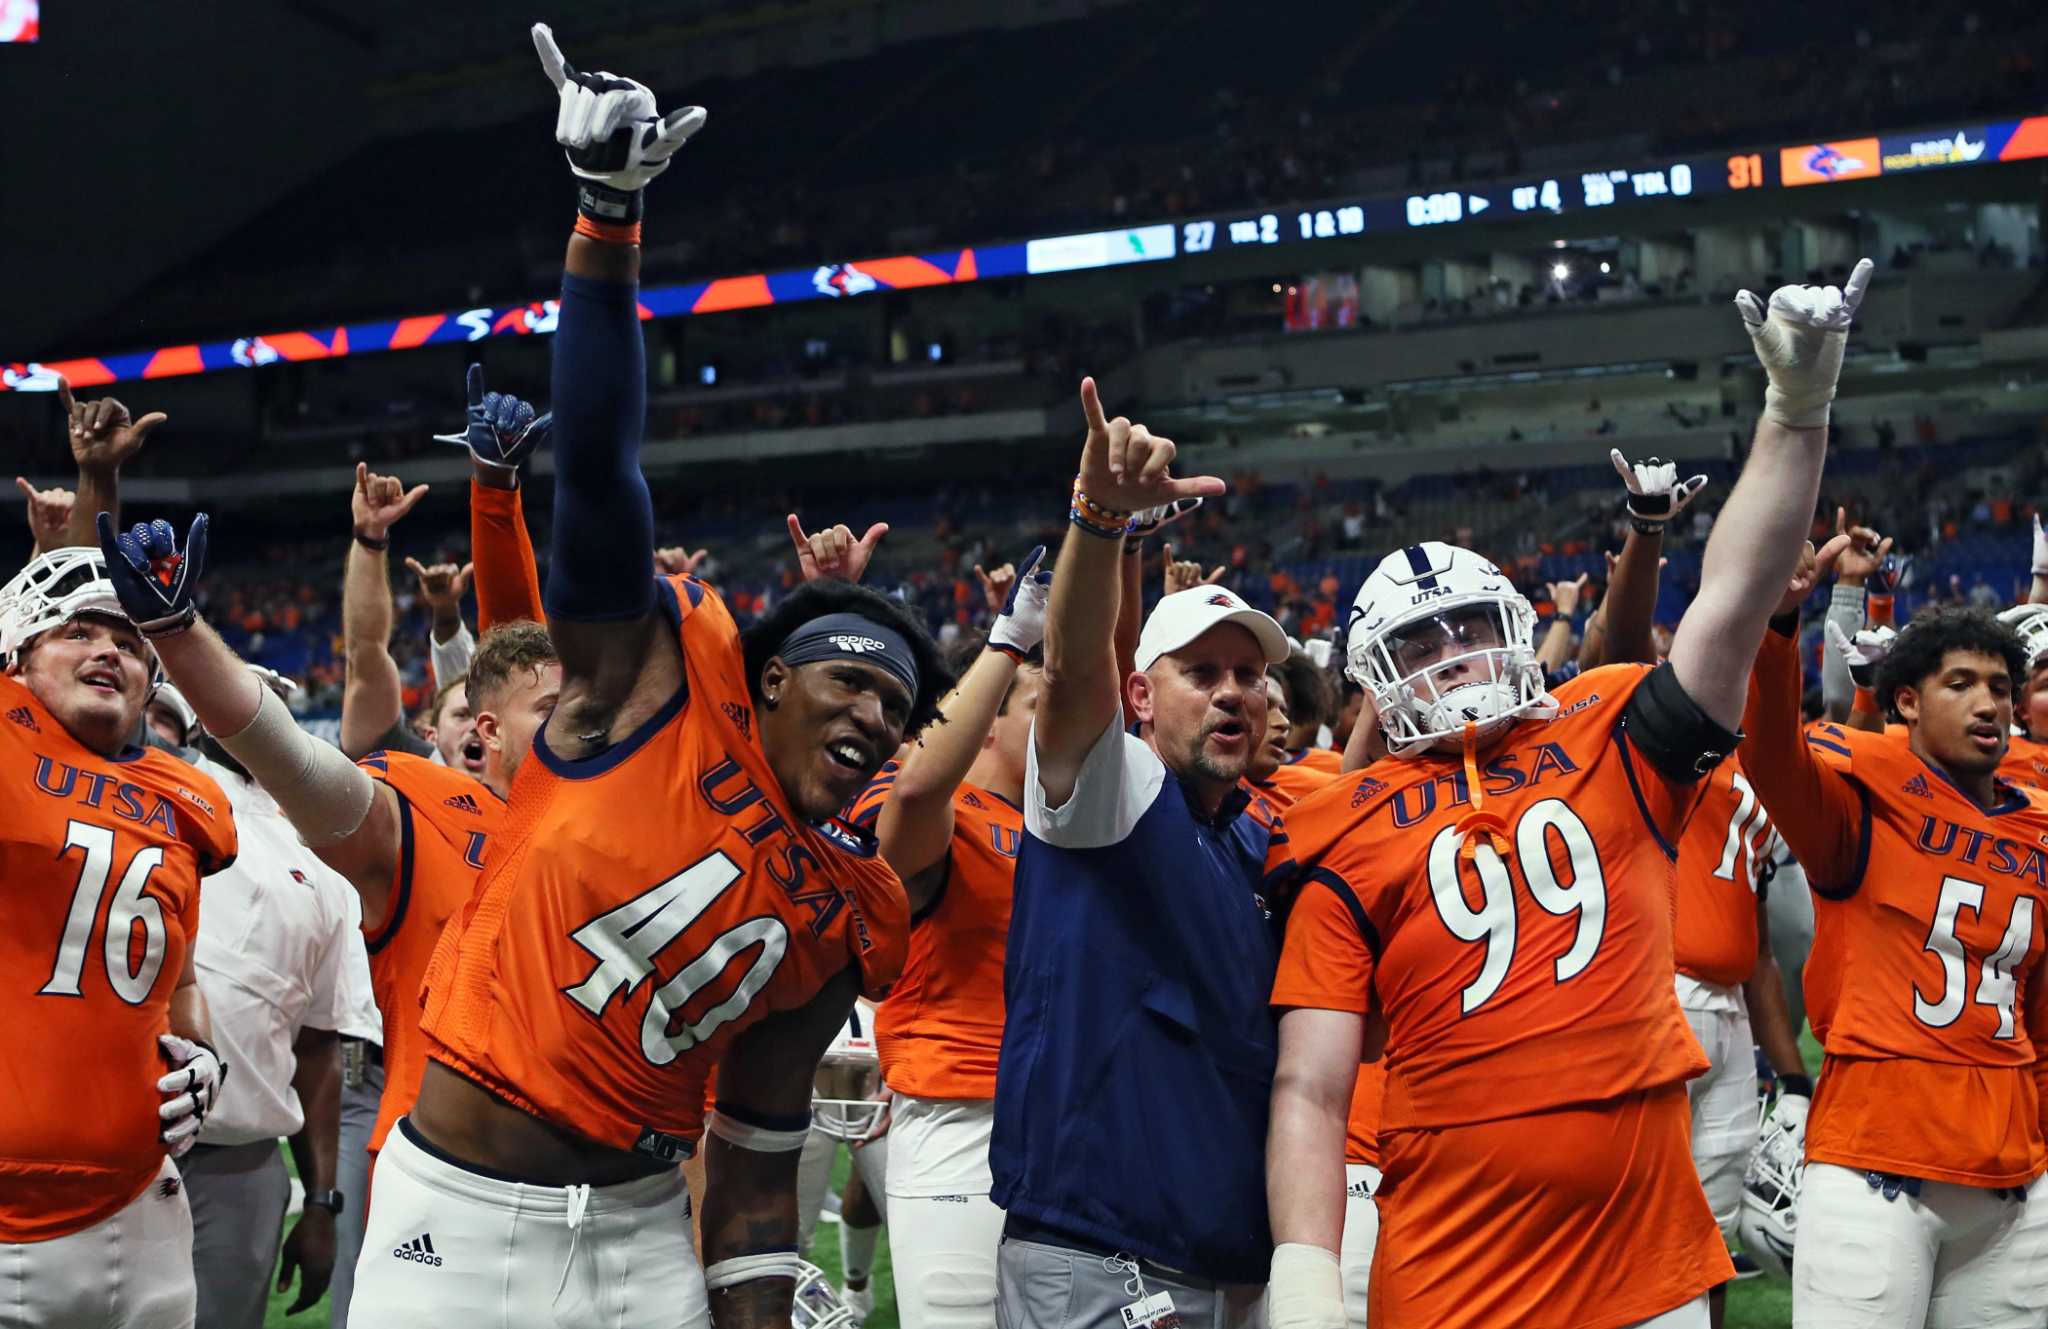 UTSA football to host Conference USA championship, tickets on sale now